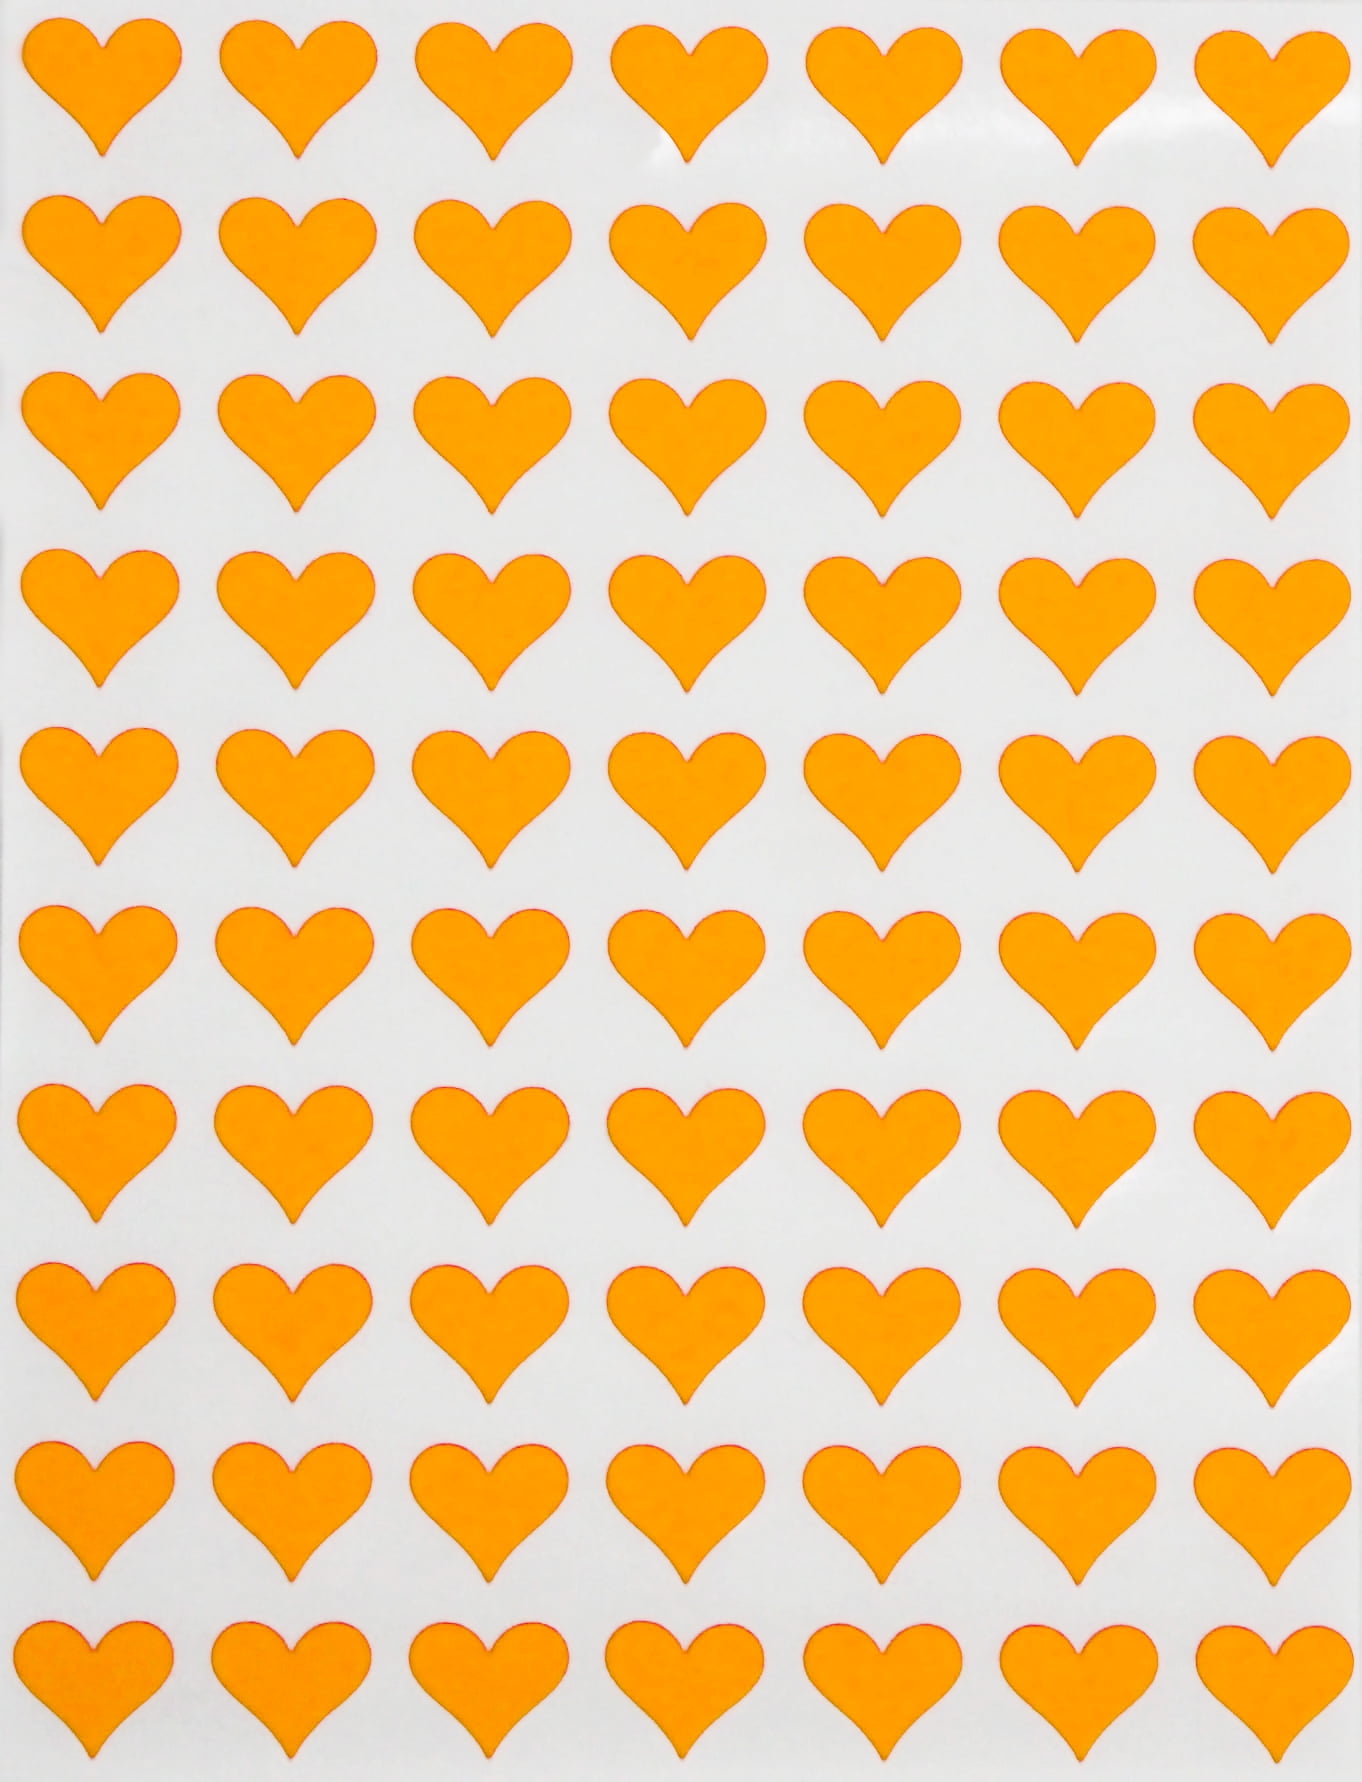 Royal Green Love Heart Sticker Labels in Neon Orange - 1/2 (0.5 inch) 13mm  Fluorescent Color Heart Stickers for Envelopes,Greeting Cards, Gift  Packaging, Boxes, and Bags - 1050 Pack 